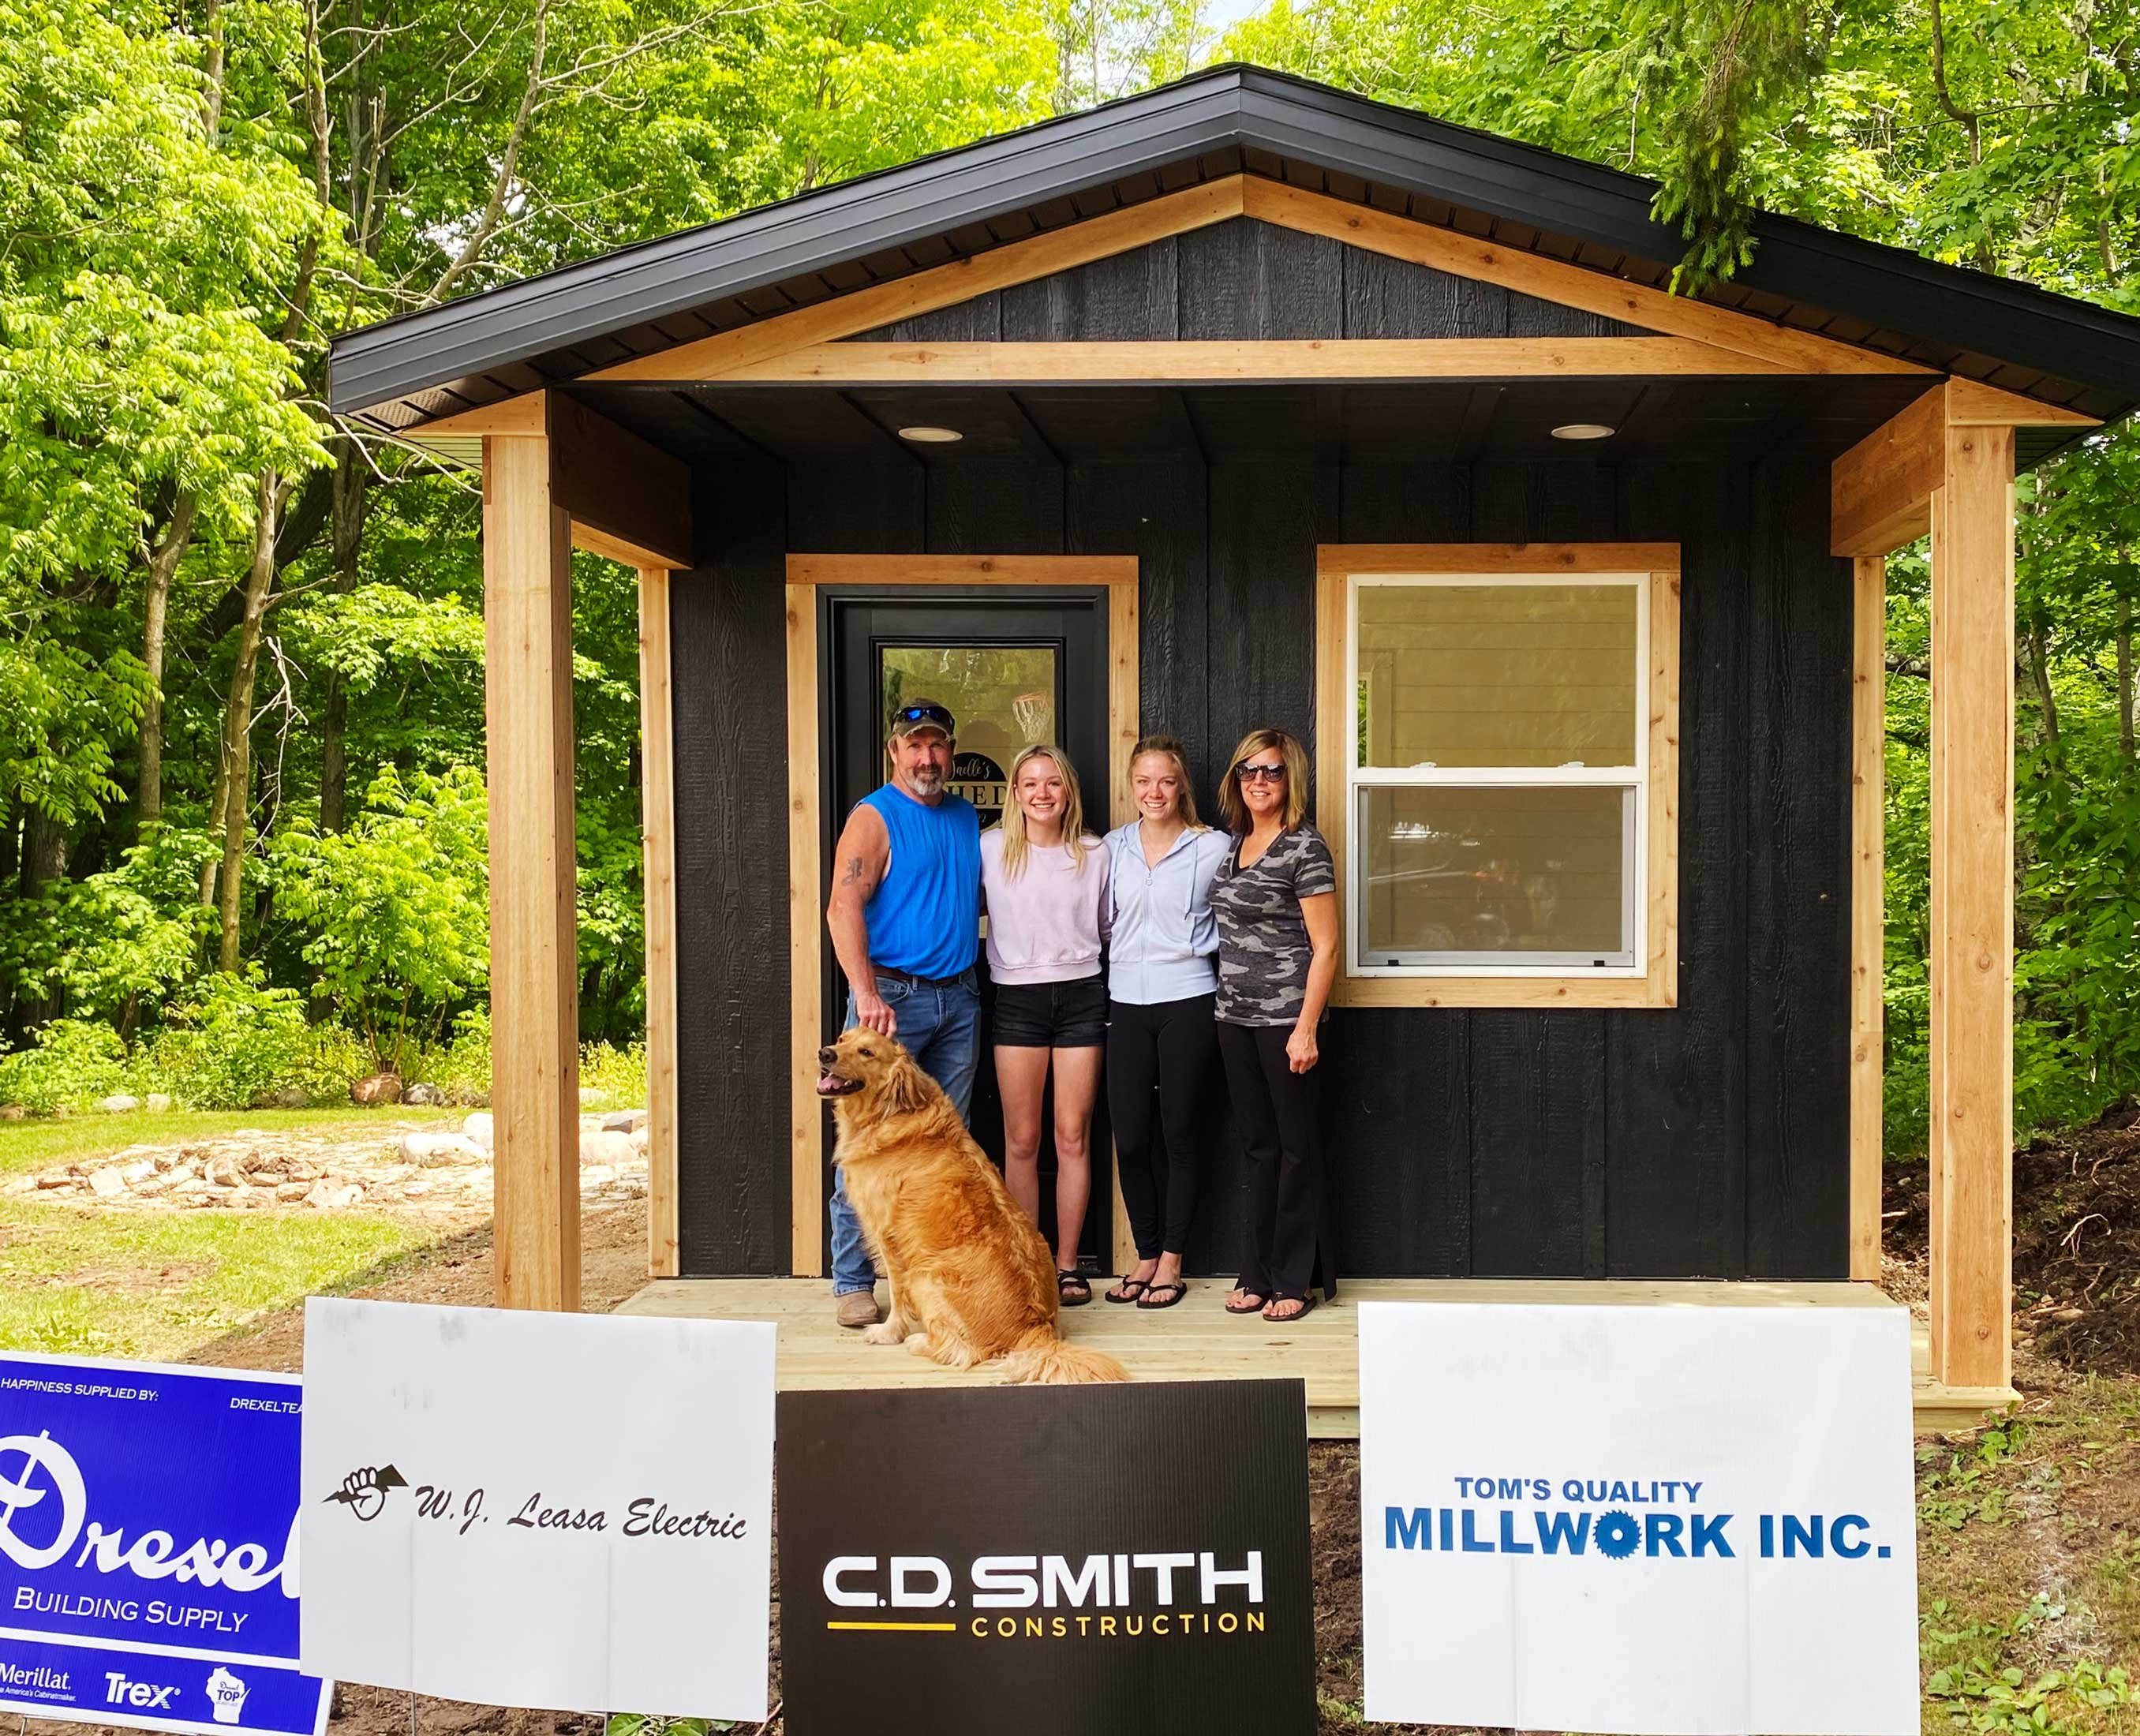 Make-A-Wish modern farmhouse She-Shed built by C.D. Smith Construction with the family standing in front.